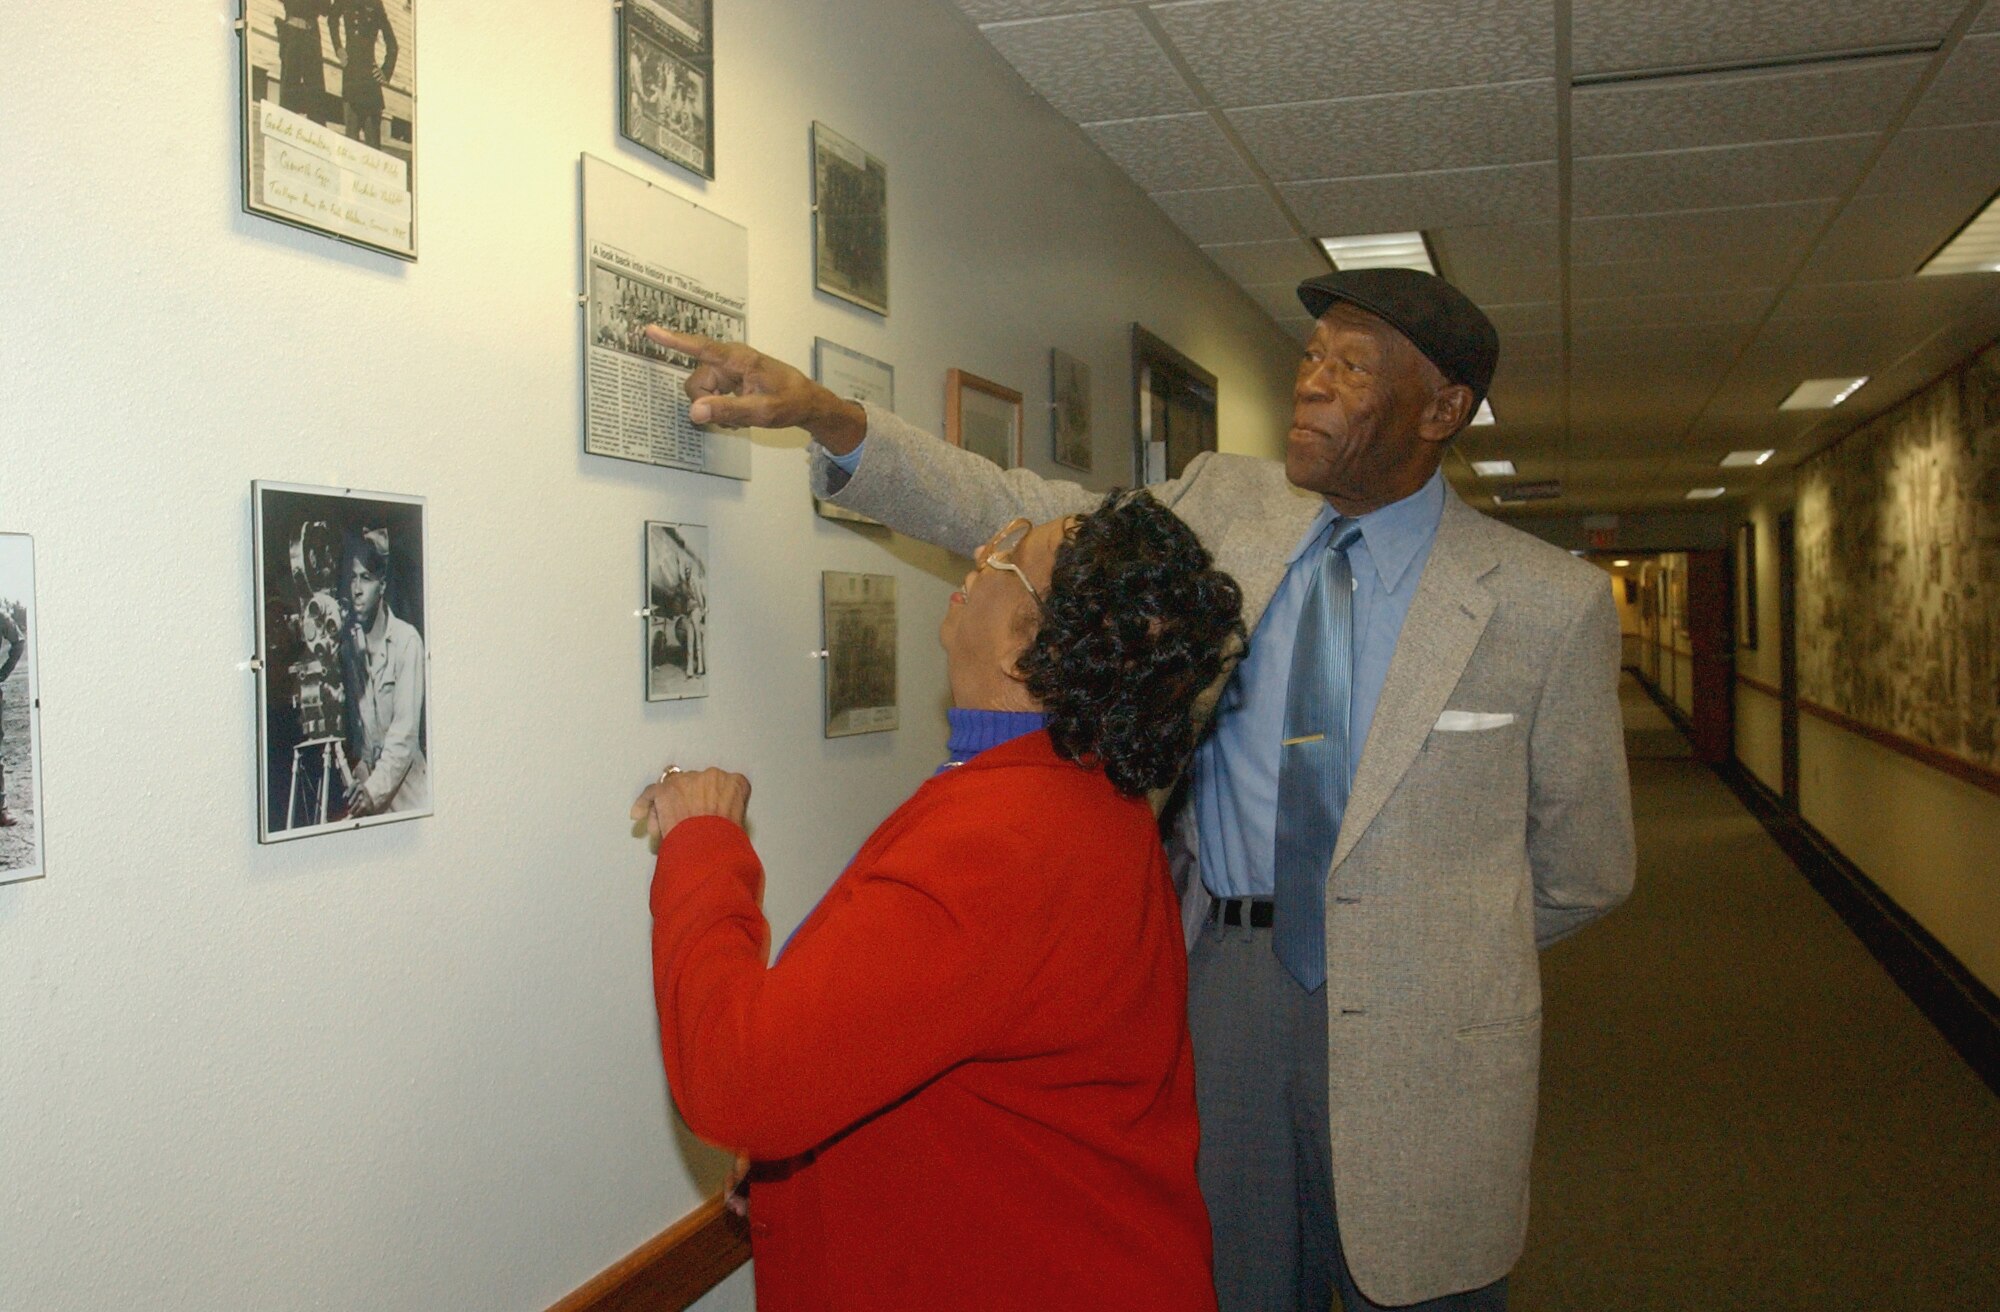 RANDOLPH AIR FORCE BASE, Texas (AFPN) -- John Miles shows his friend Mildred Jones a photo he is in at the 99th Flying Training Squadron. He recently visited the unit he was assigned to in the 1940s. (U.S. Air Force photo by Staff Sgt. Lindsey Maurice) 

